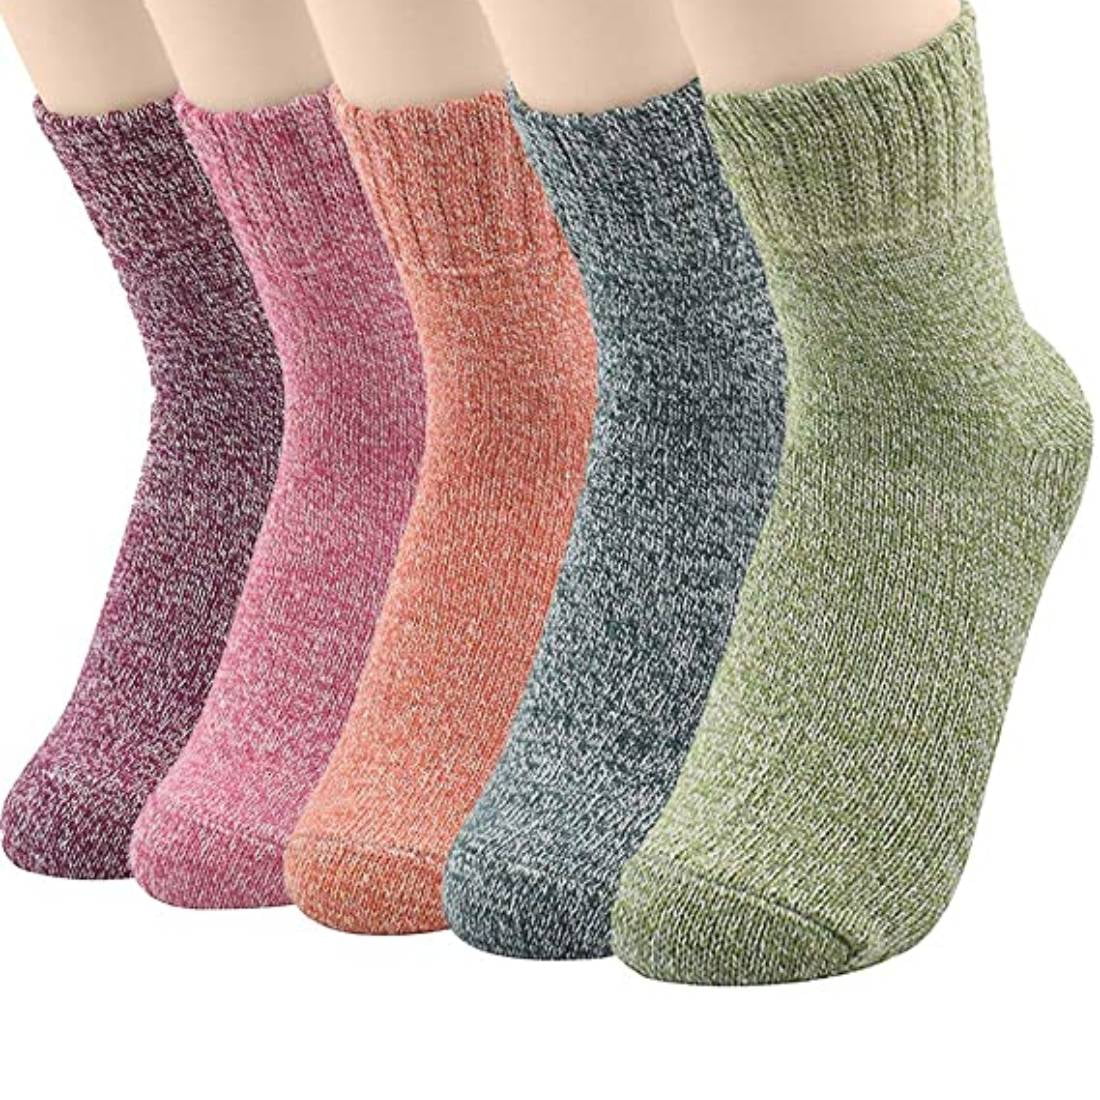 5 Pairs Stripe Womens Cashmere Wool Thick Warm Soft Comfort Solid Casual Socks